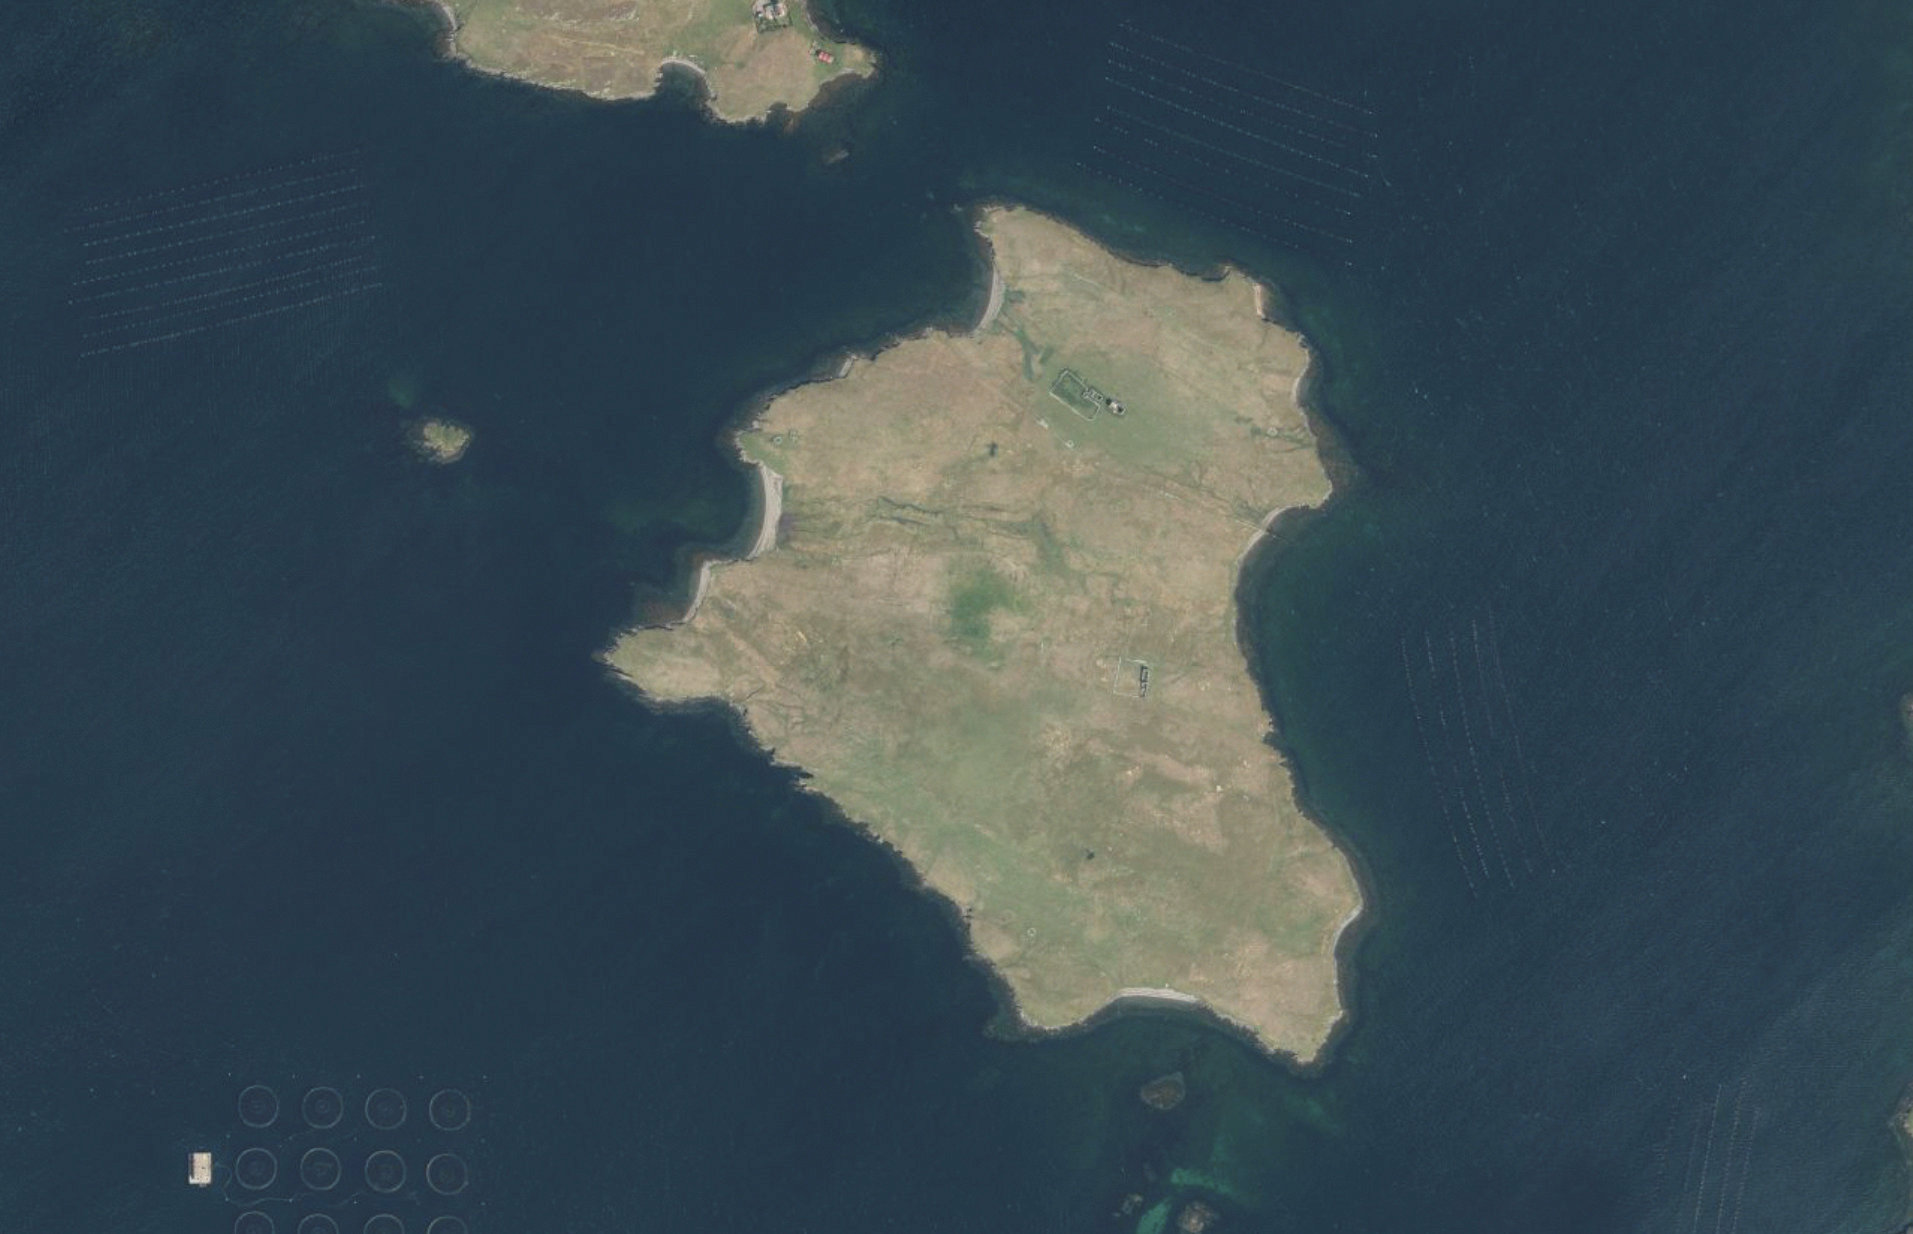 This private island called Linga is for sale off Shetland. SWNS.